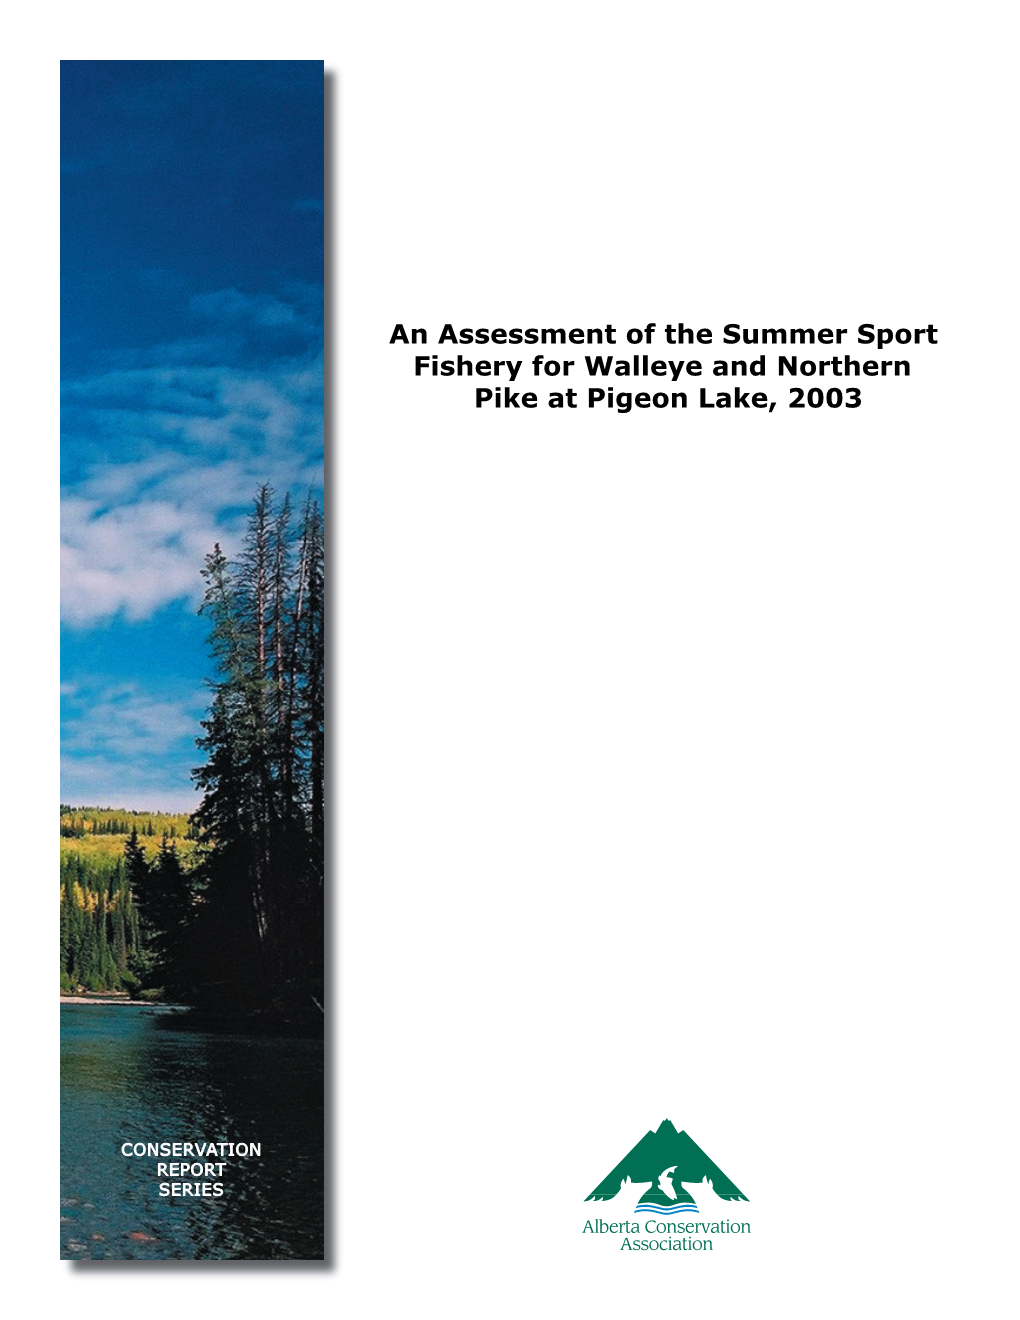 An Assessment of the Summer Sport Fishery for Walleye and Northern Pike at Pigeon Lake, 2003